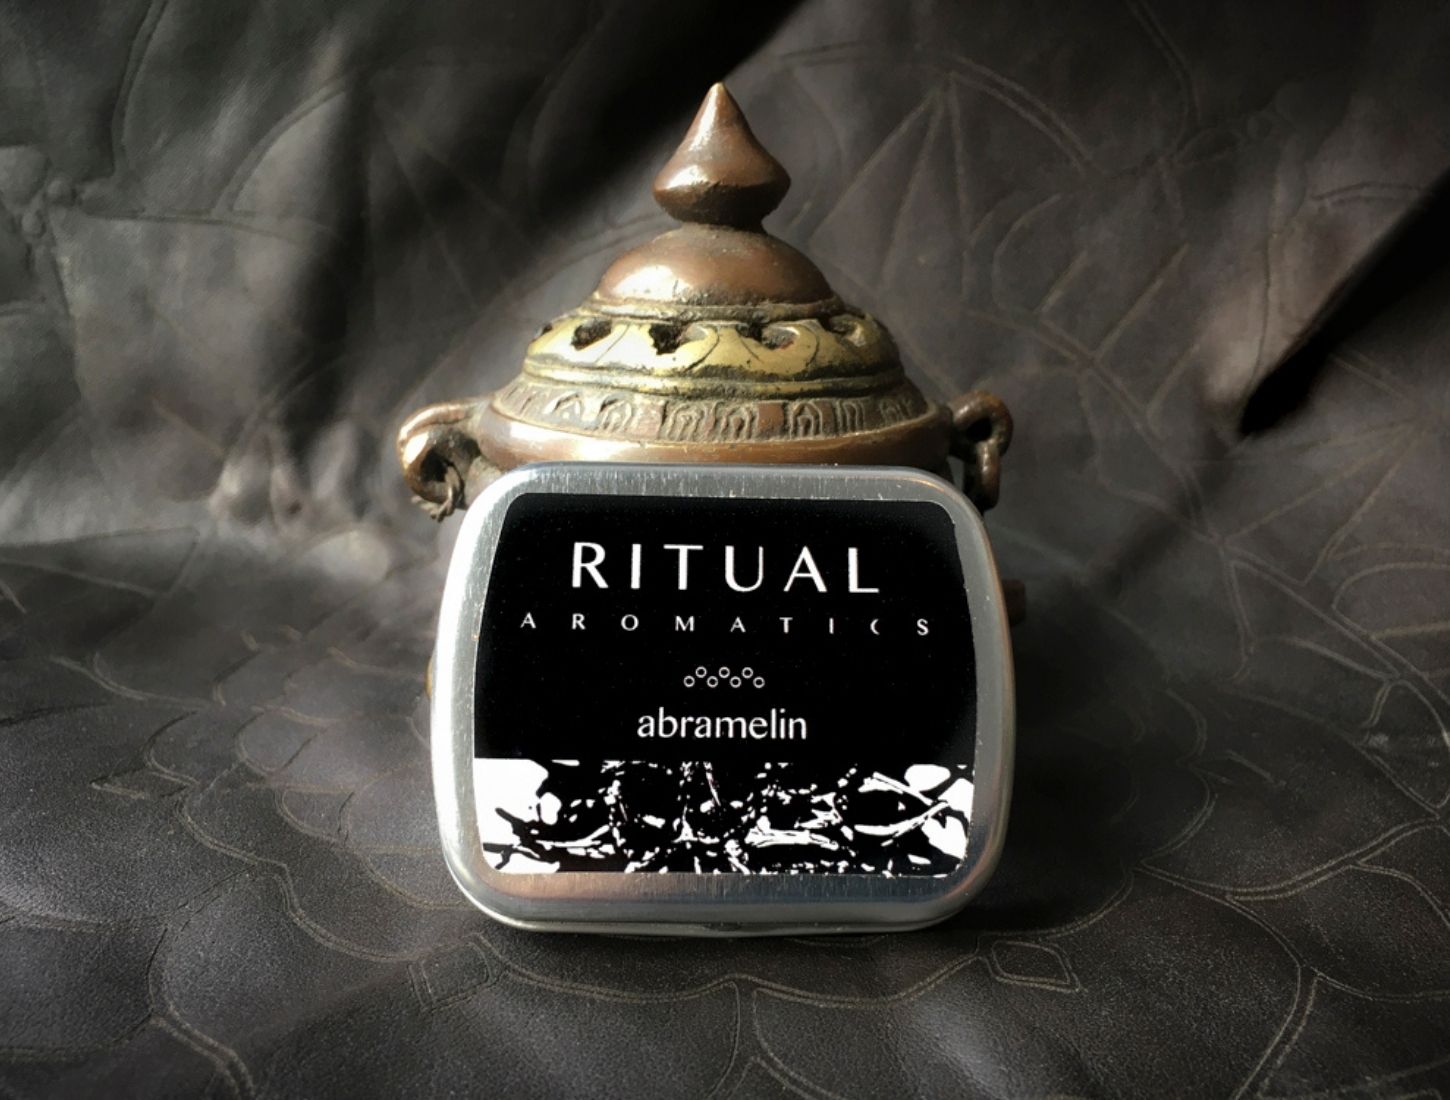 Ritual Aromatics Abramelin Natural Loose Incense on gray leather in front of an antique brass incense burner